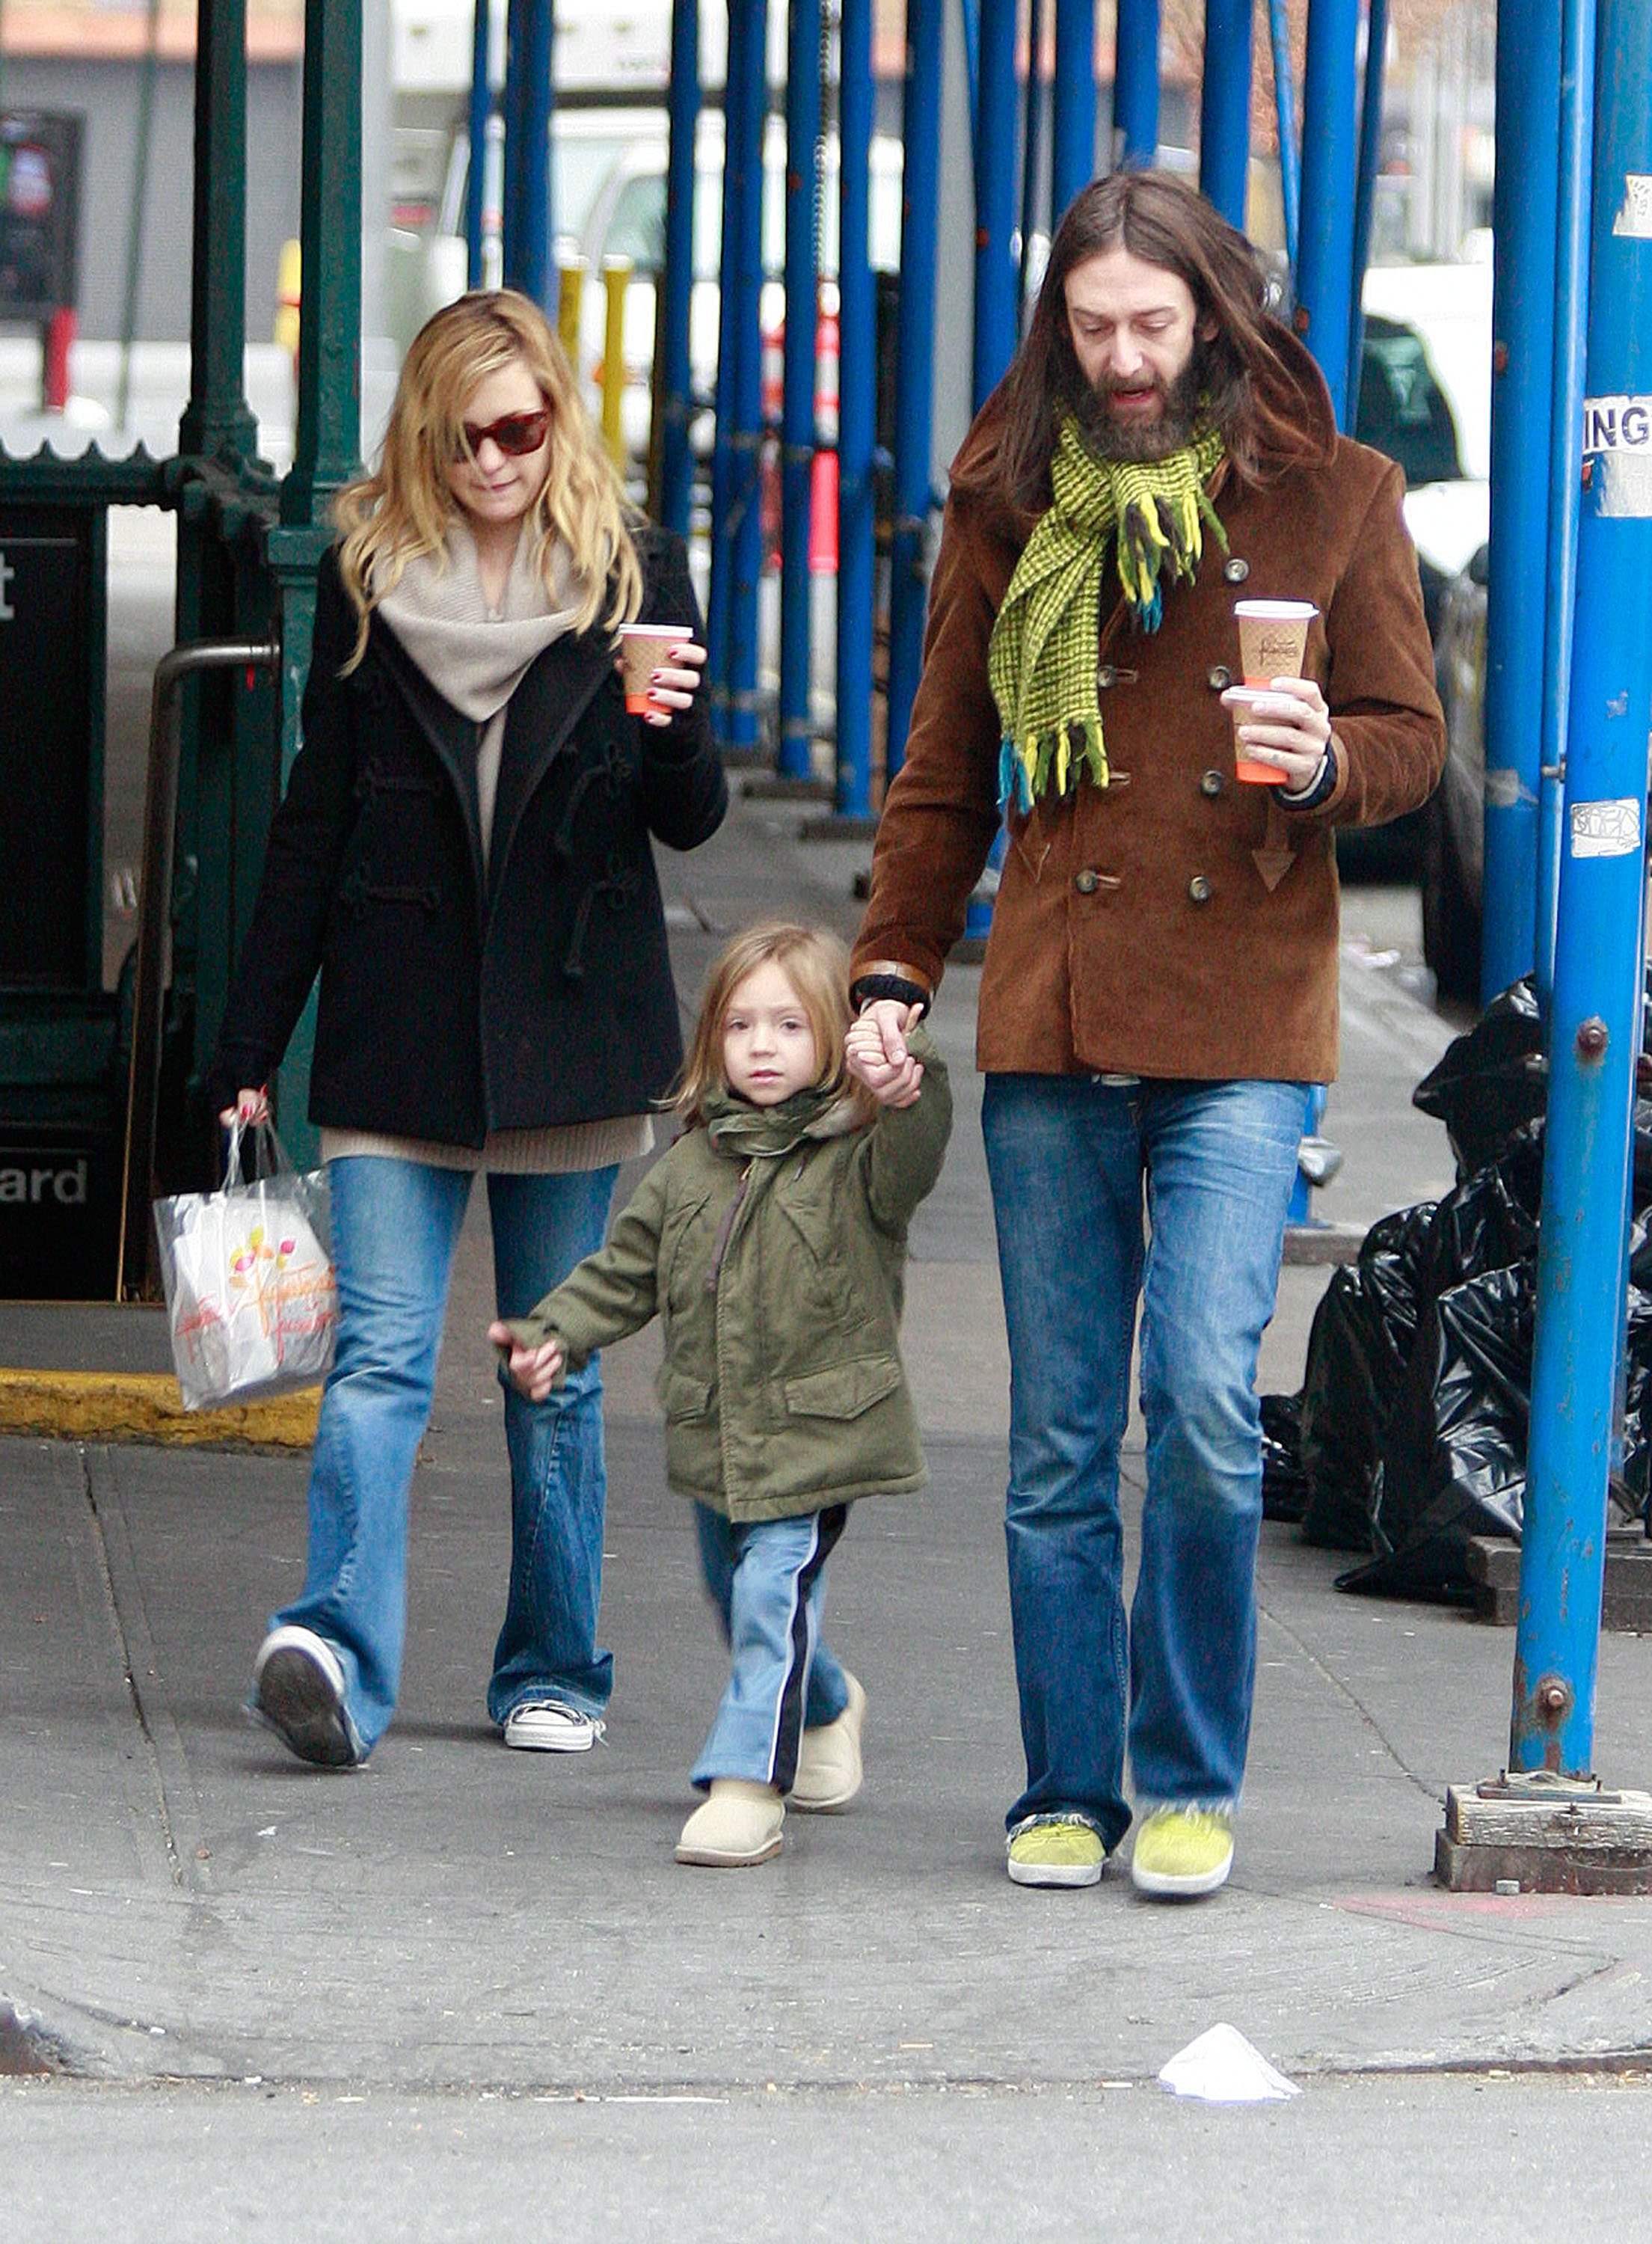 Kate Hudson and her ex husband Chris Robinson pictured walking with their son Ryder Robinson in SOHO on December 9 2007 in New York City, New York. / Source: Getty Images